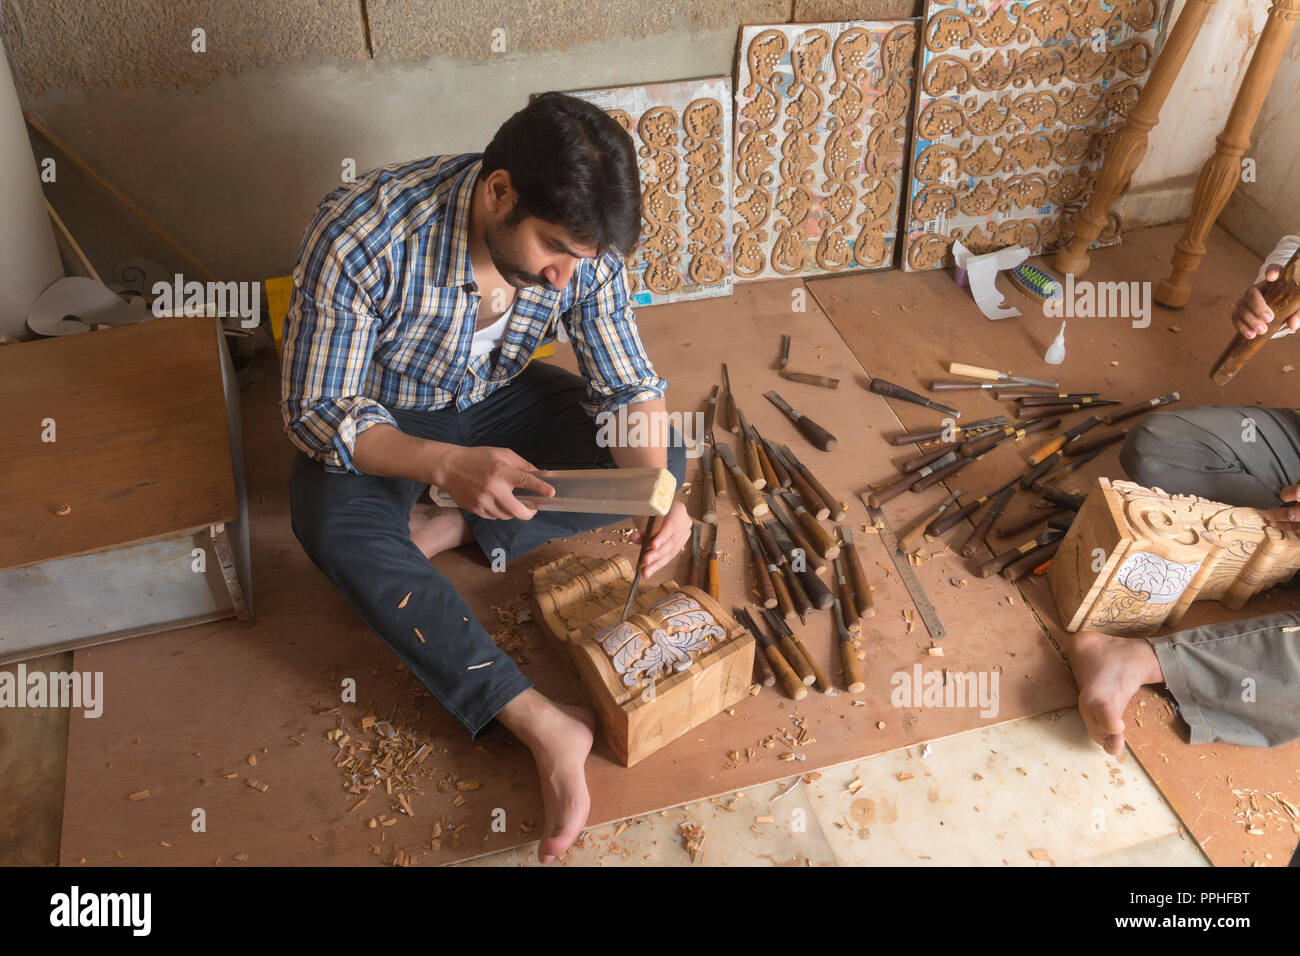 Carpenter using a chisel to make carvings and designs on wood in his workshop. Stock Photo